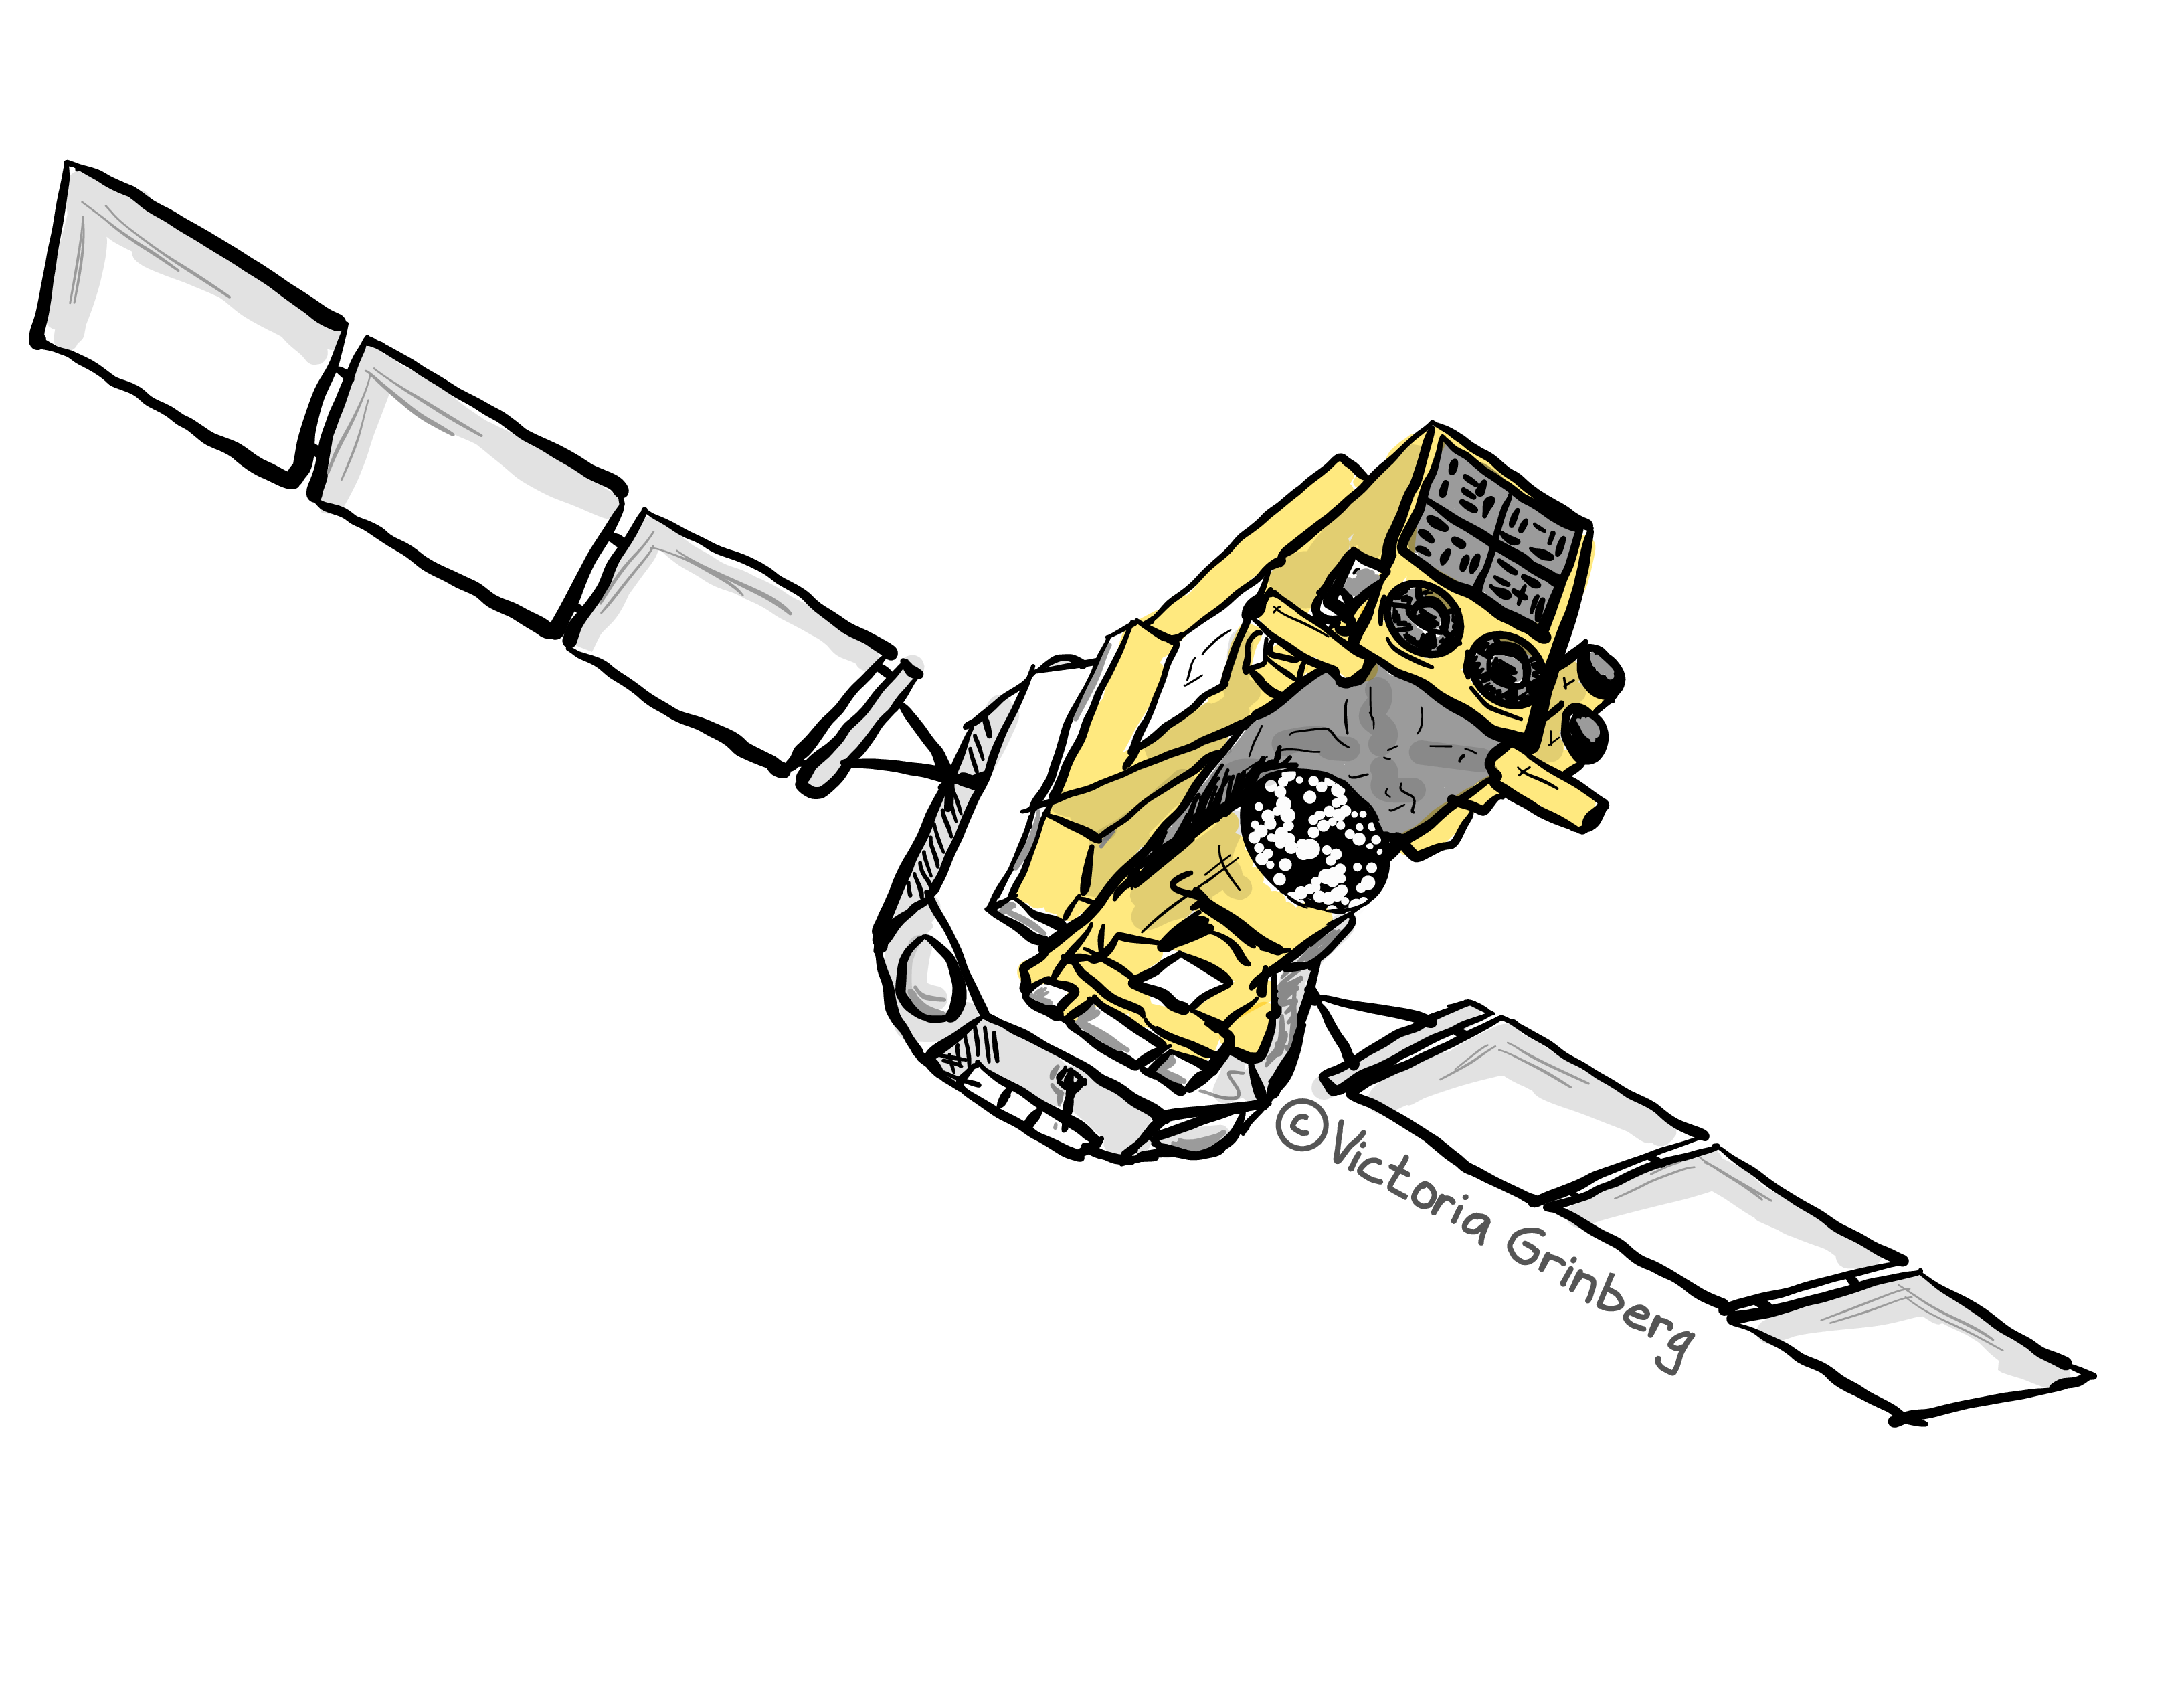 A mainly black & white sketch of ESA's INTEGRAL satellite with only grey using for some of the shading and yellow/gold for the gold foil that covers big parts of the satellite body.